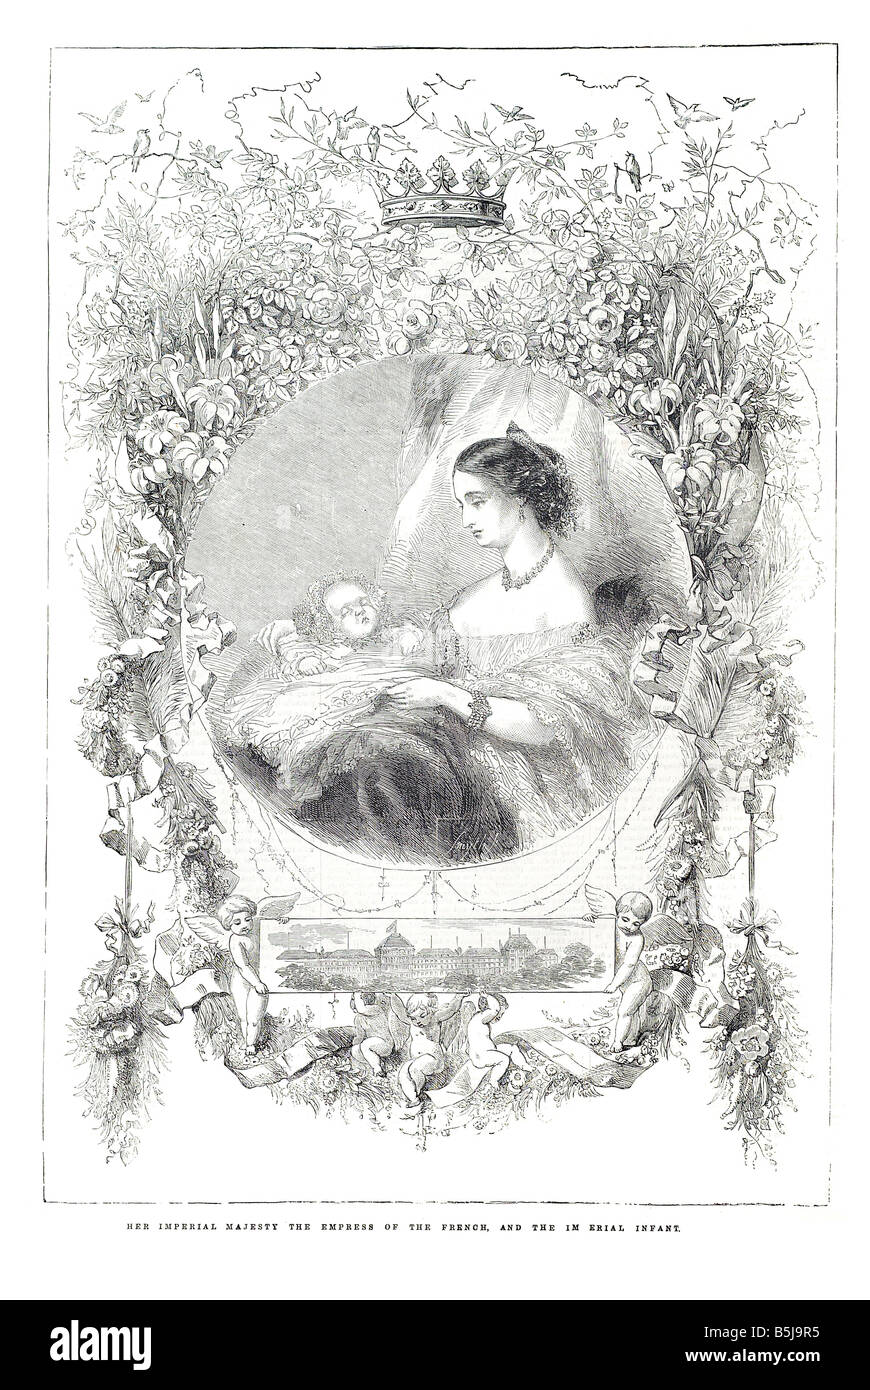 Her imperial majesty the empress of the French and the imperial infant June 21 1856 The Illustrated London News Page 681 france Stock Photo